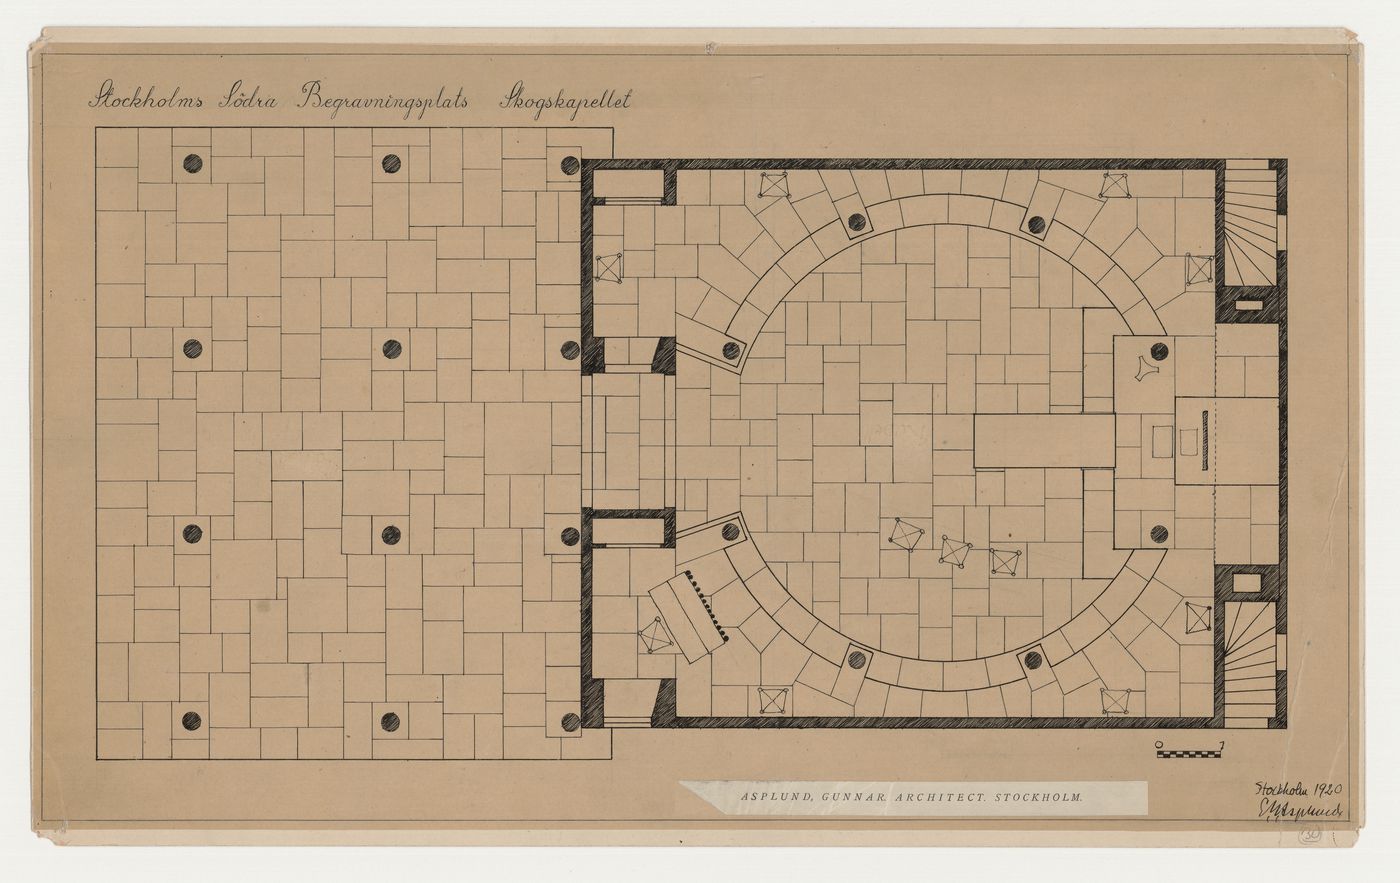 Ground plan for Woodland Chapel showing furniture placement and tile flooring, Woodland Cemetery, Stockholm, Sweden